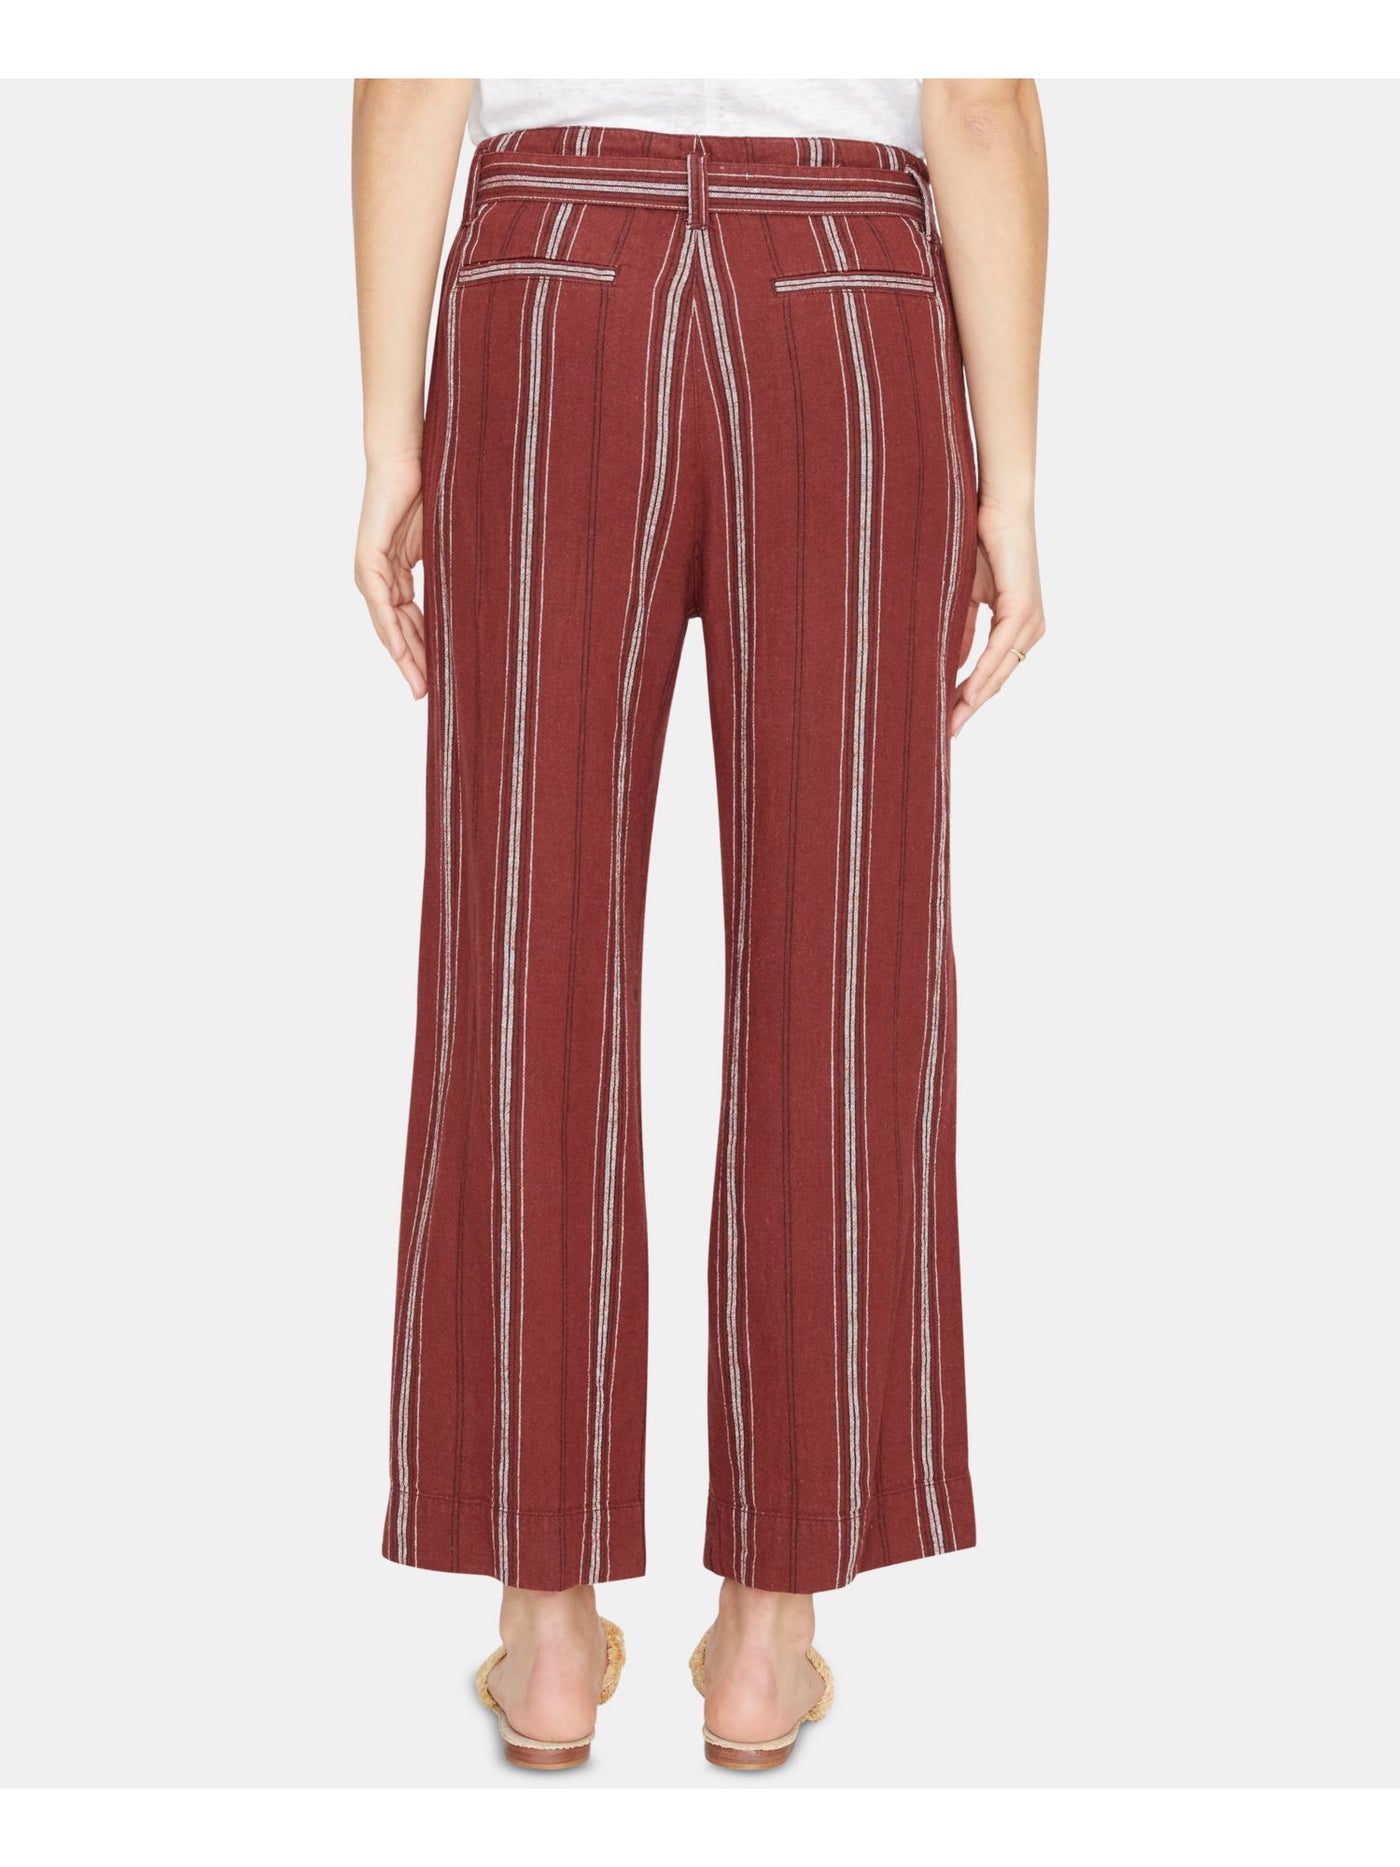 SANCTUARY Womens Maroon Belted Pocketed Striped Wide Leg Pants Size: 26 Waist